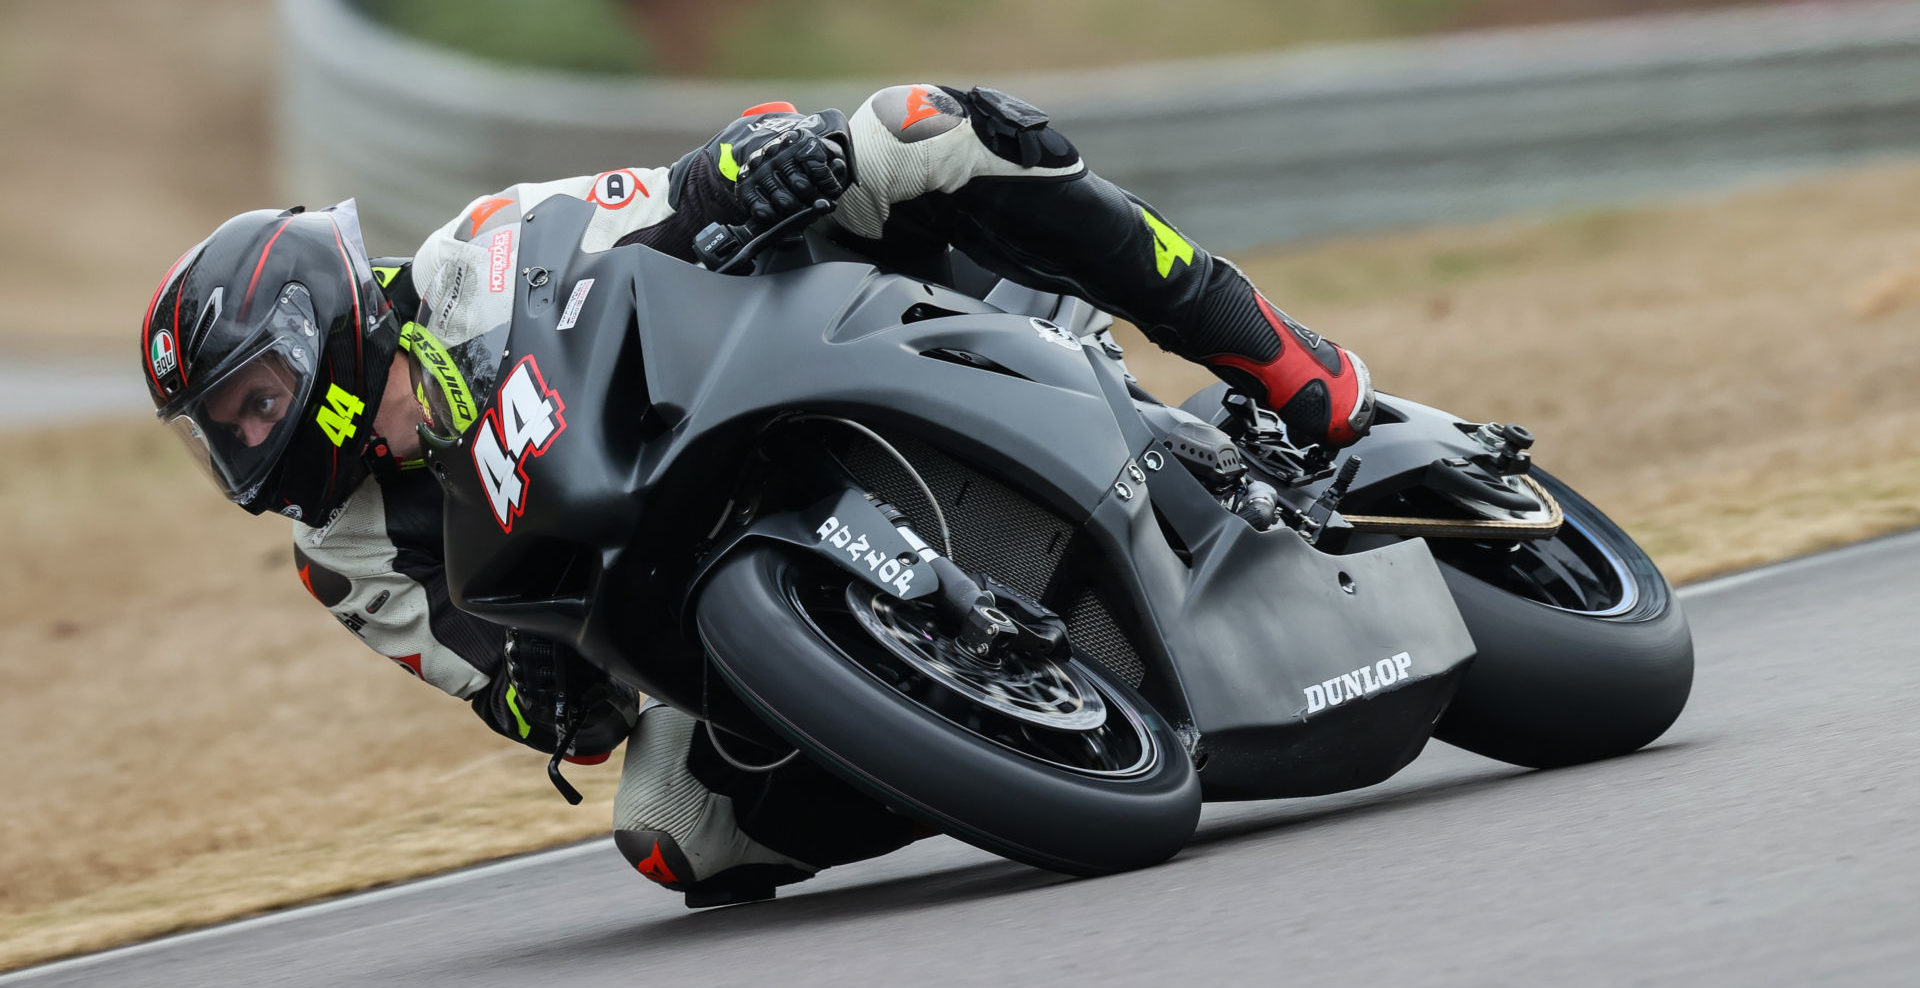 Dunlop motorcycle tire test engineer/rider Taylor Knapp (44) in action during the official MotoAmerica pre-season test at Barber Motorsports Park. Photo by Brian J. Nelson.